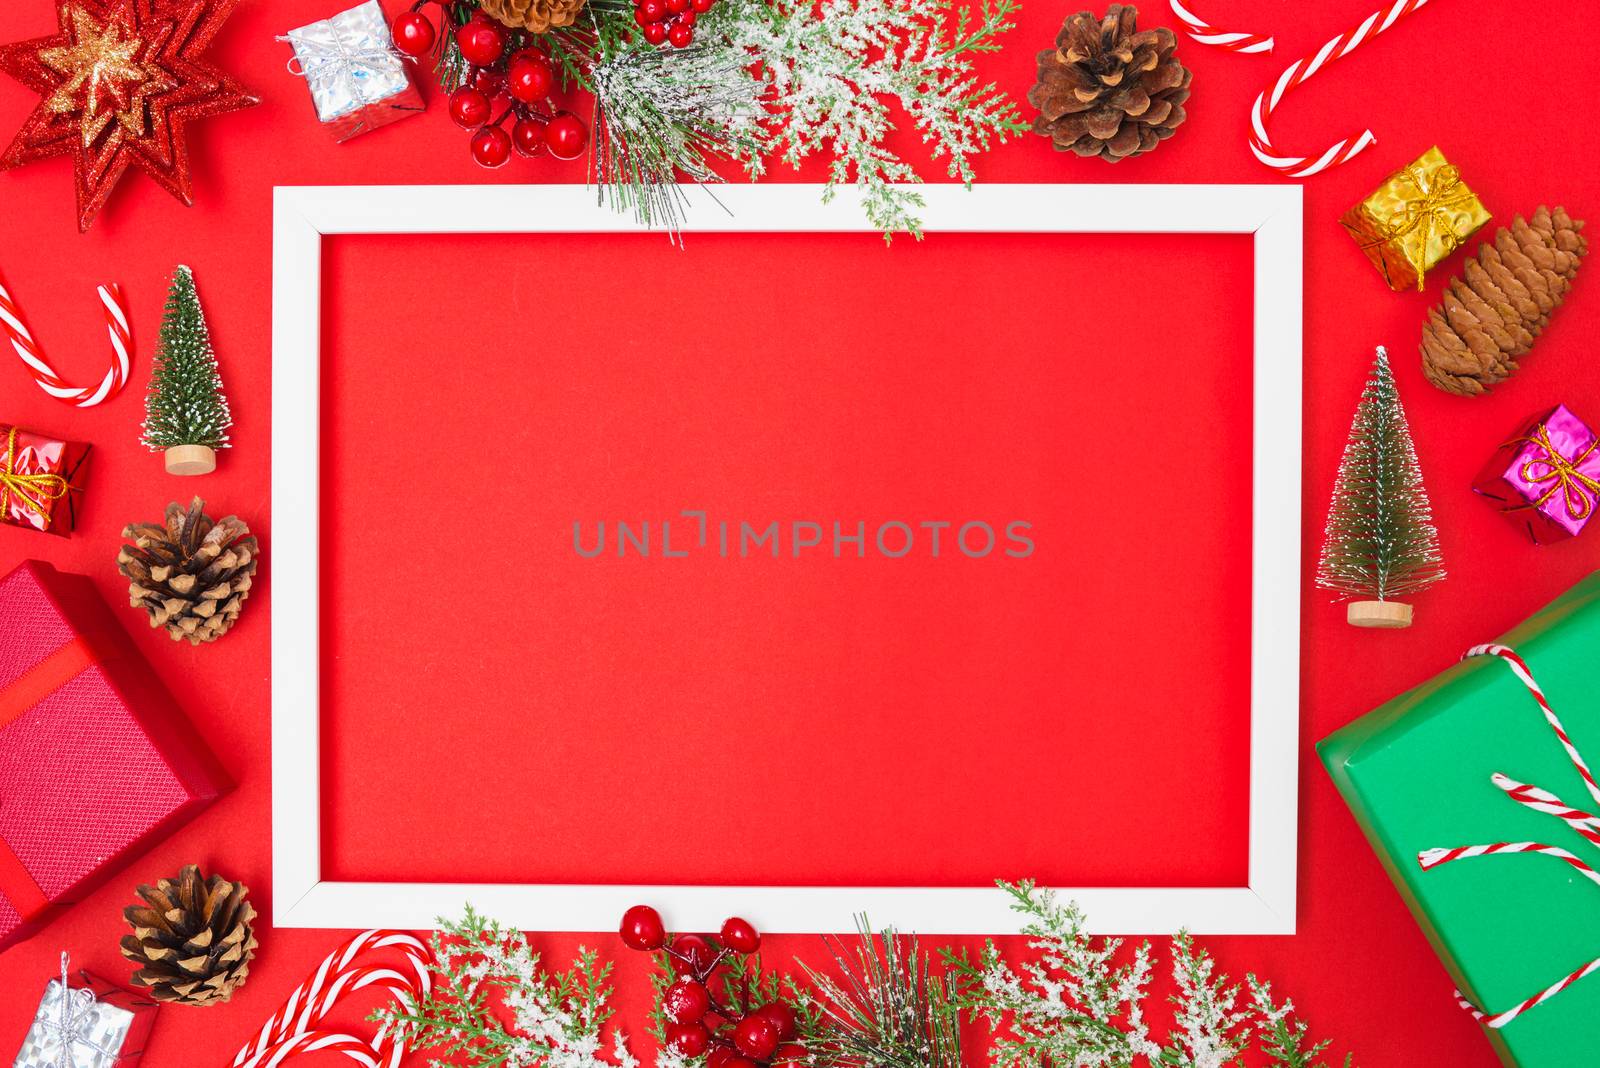 Christmas composition decorations, fir tree branches with Photo square frame on red background. Merry Christmas concept. Copy space for text